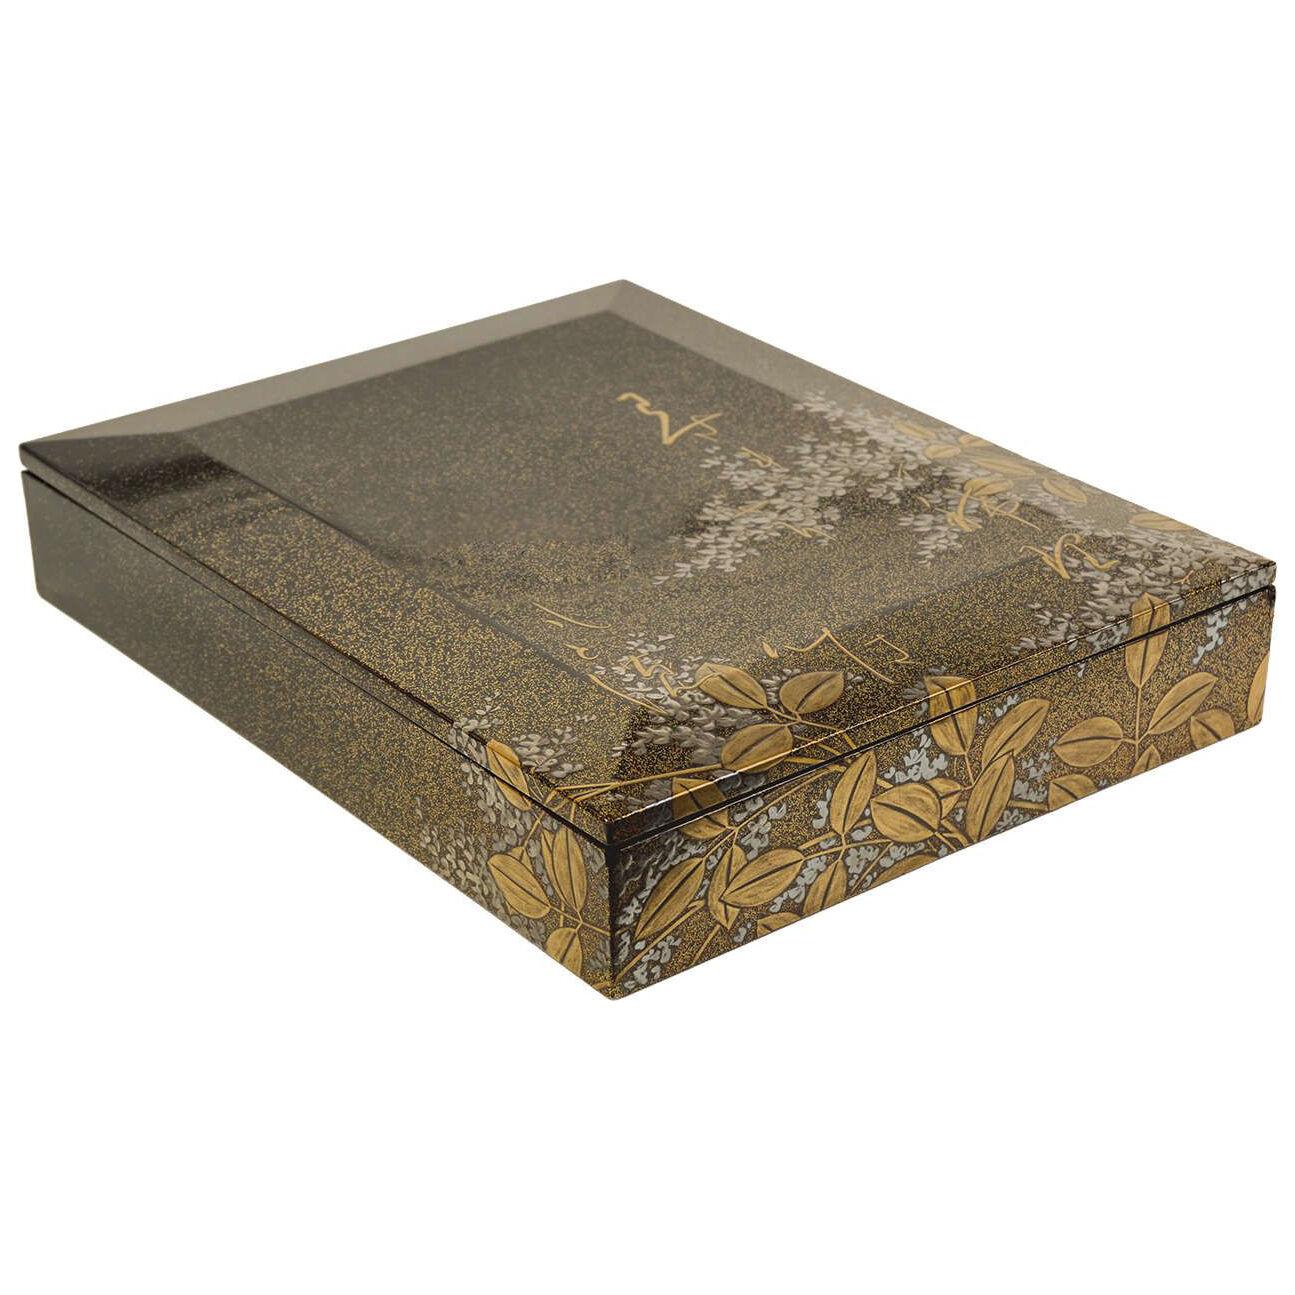 Japanese lacquer writing box (suzuribako) with a poem